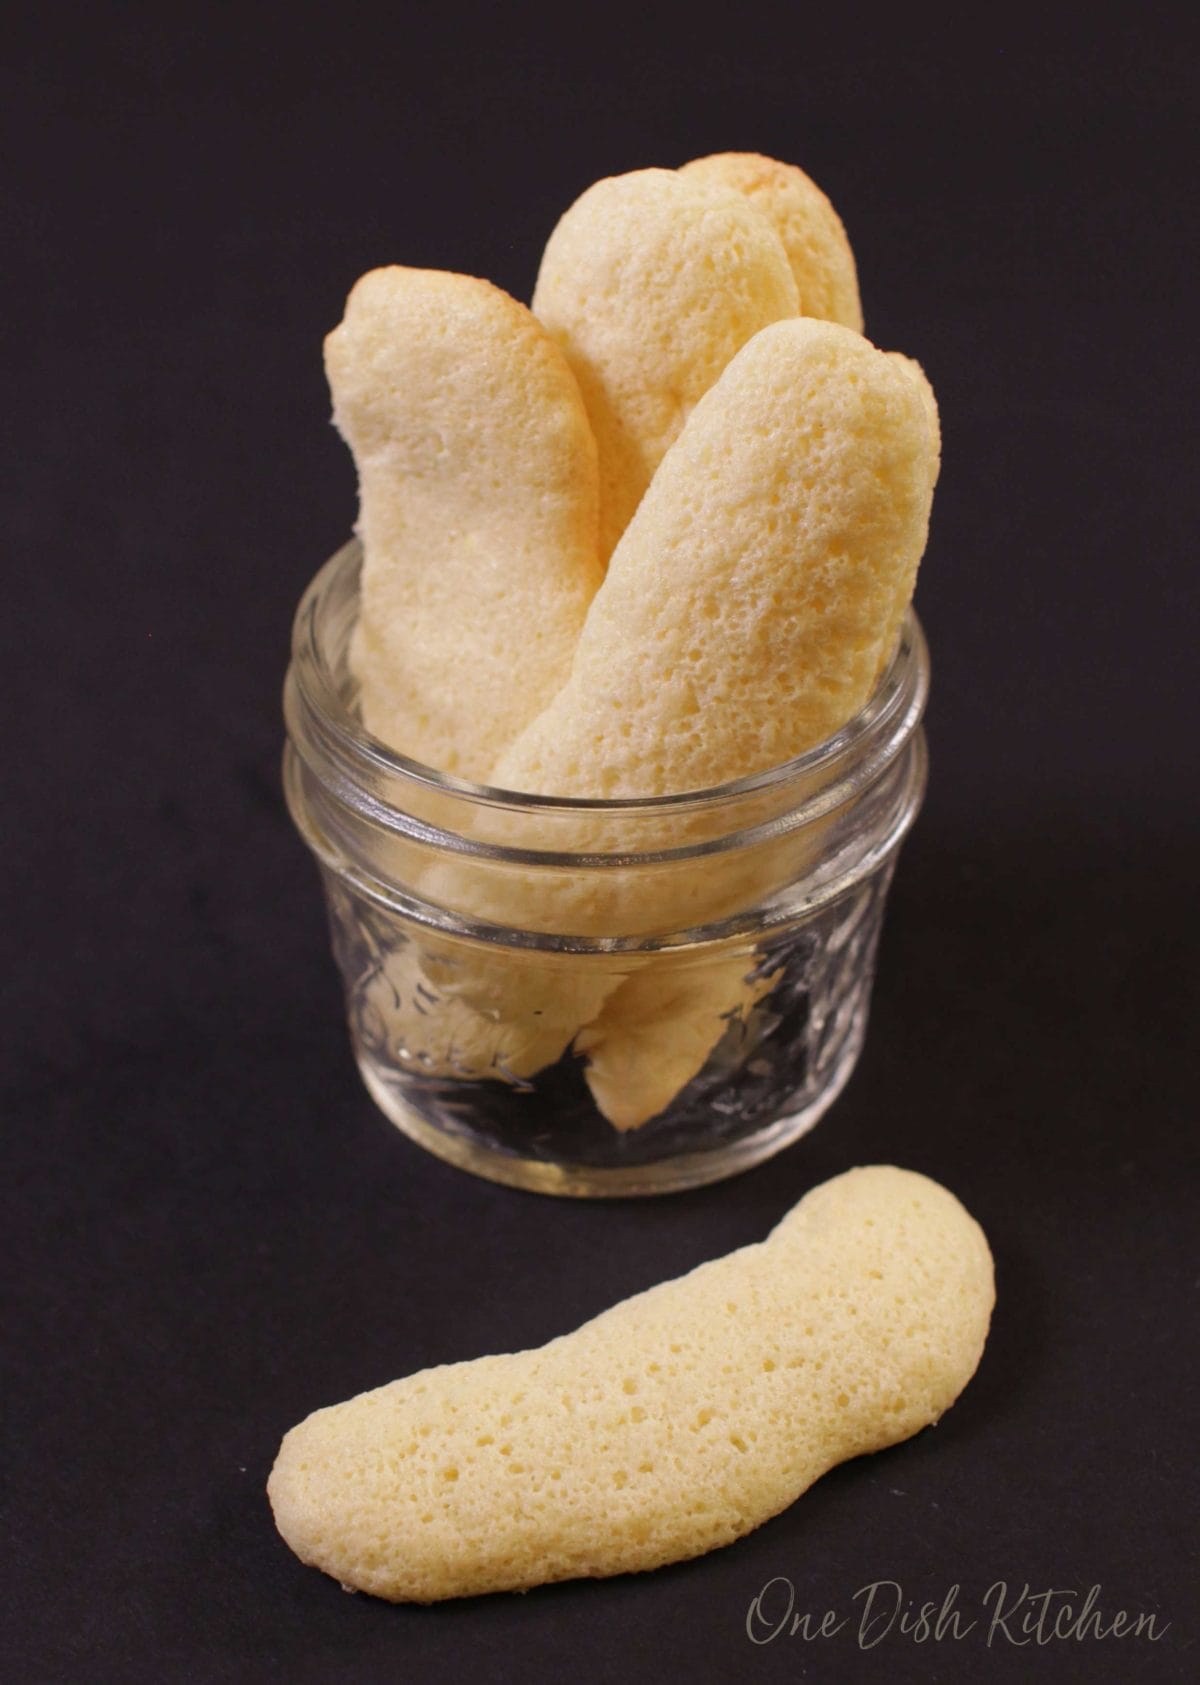 A small jar of homemade ladyfingers with one laying on a black table.